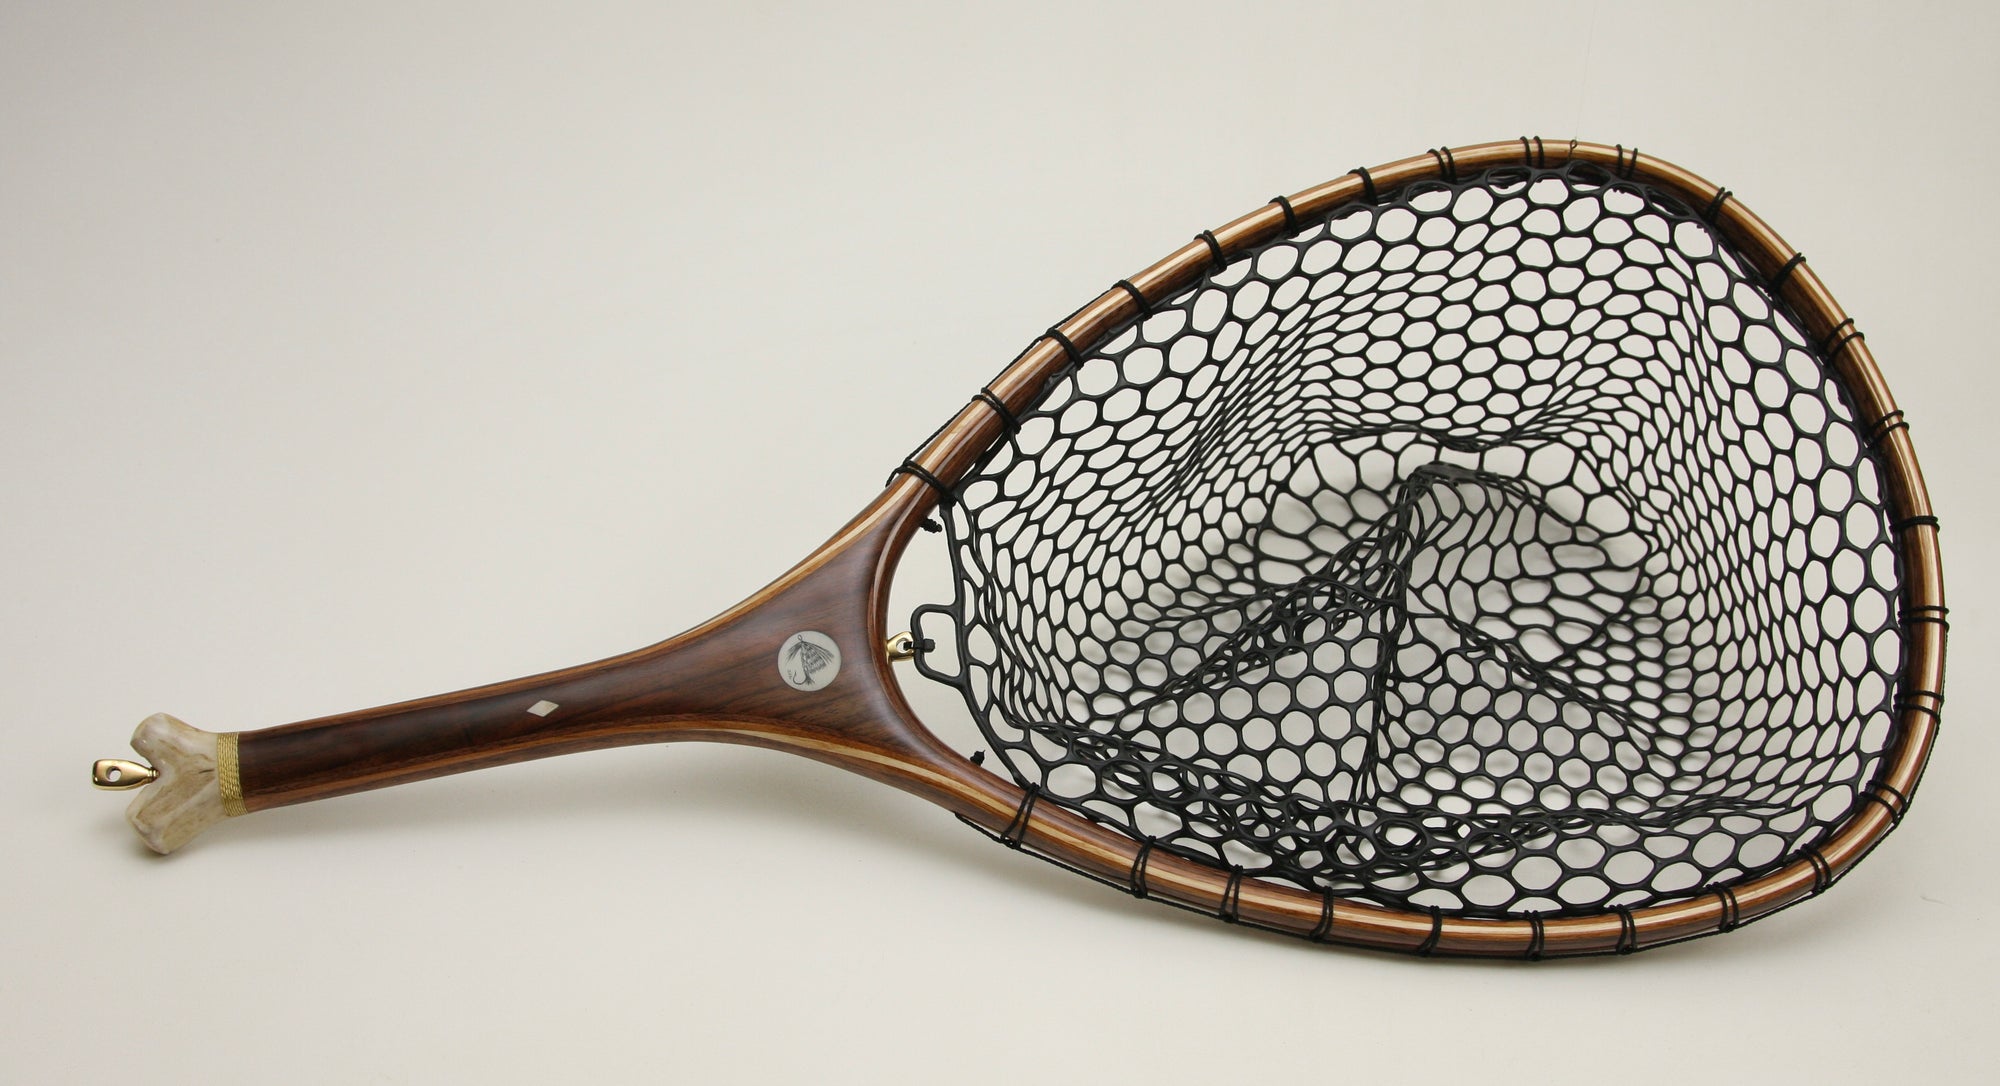 Large Fly Fishing Net of mixed woods, with added features.